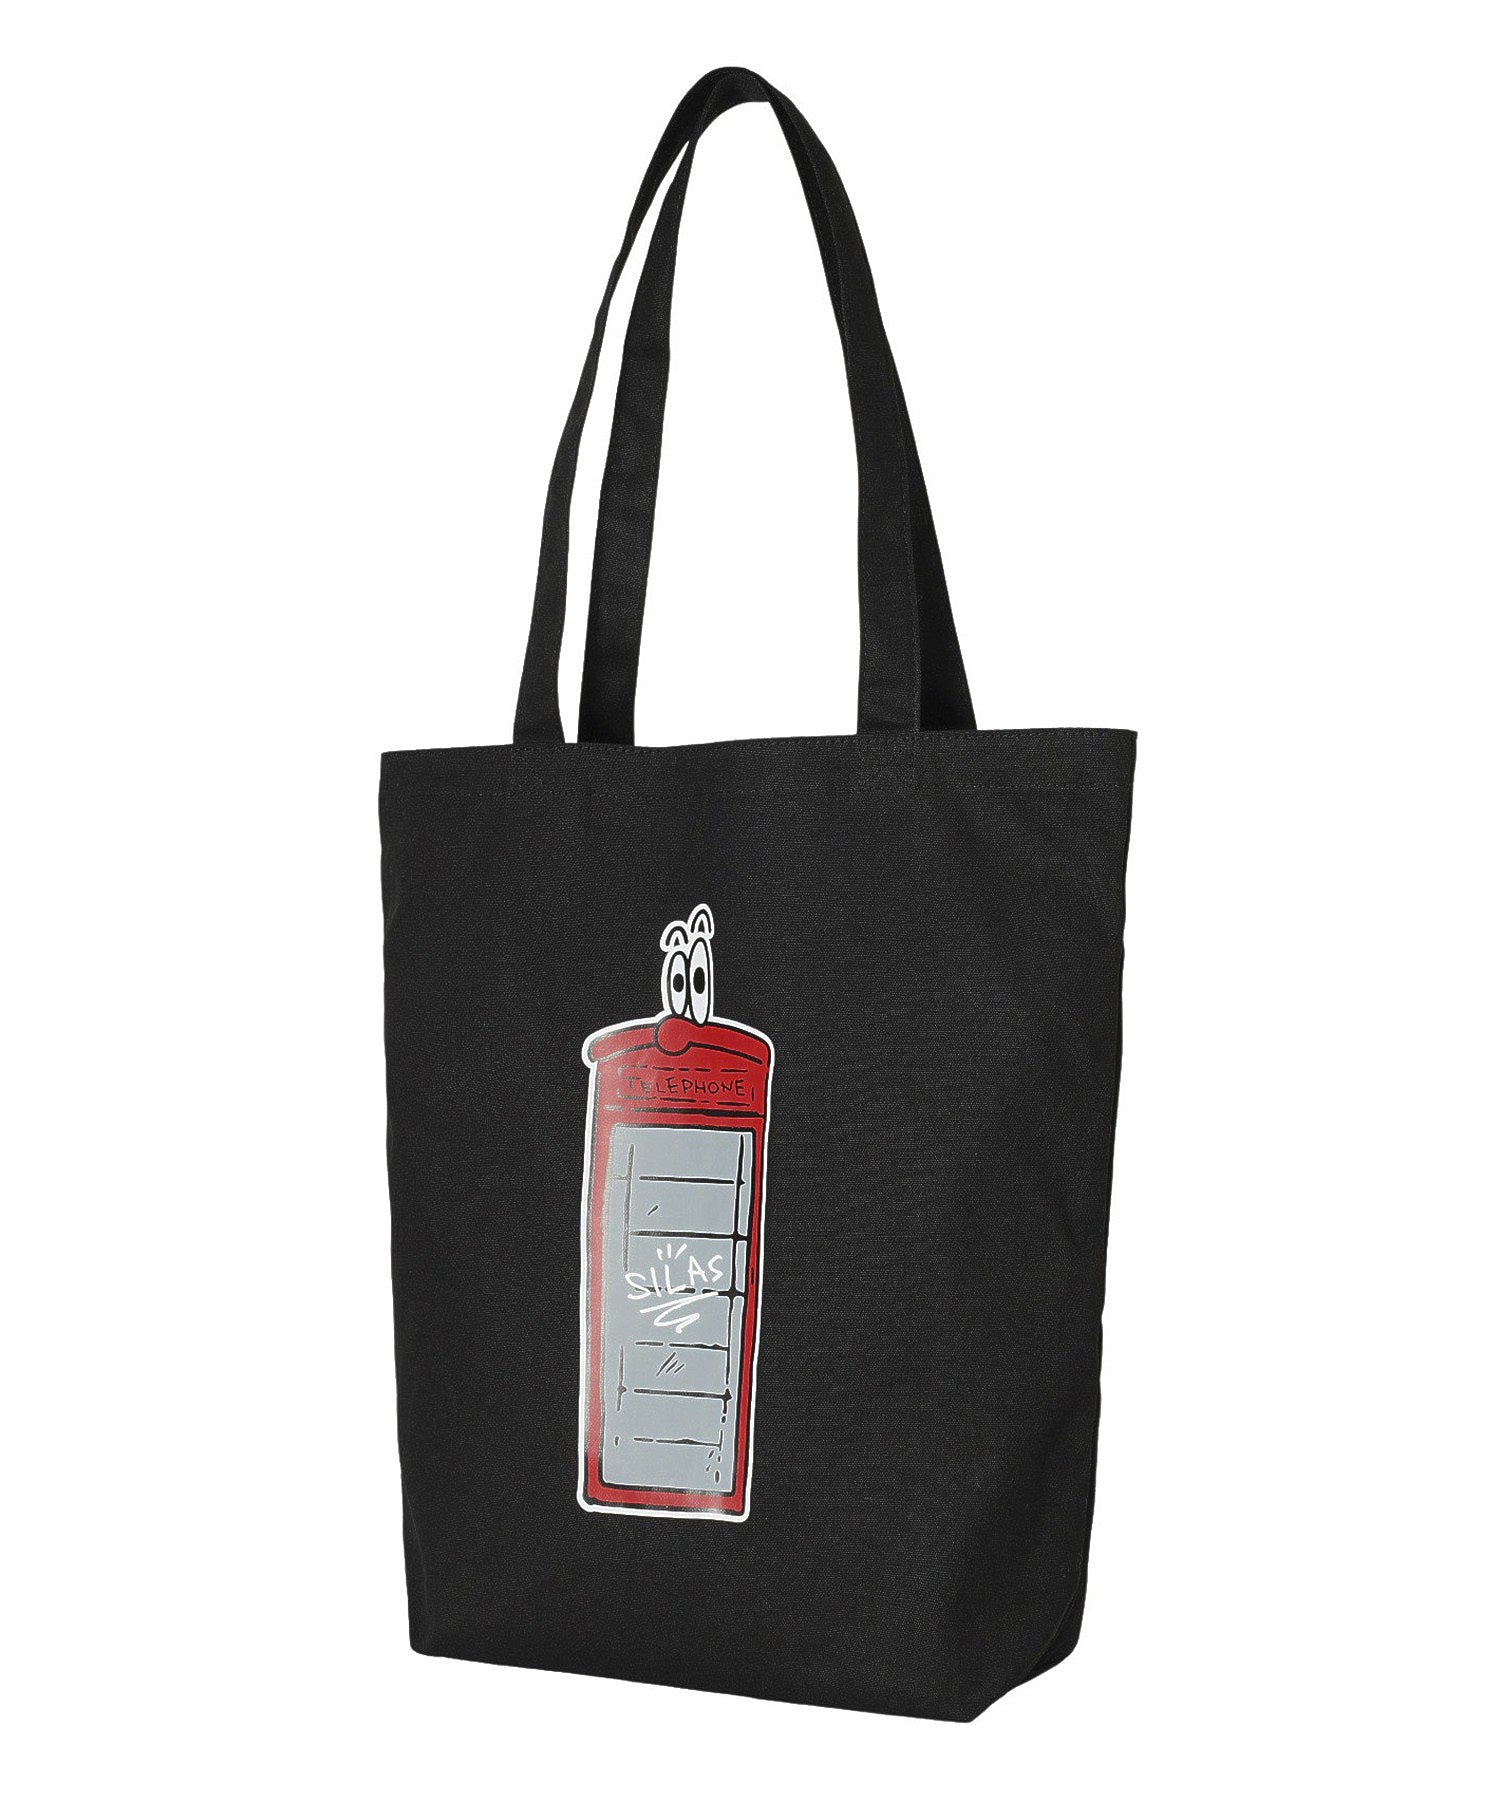 SILASxMAW PHONE BOOTH TOTE BAG